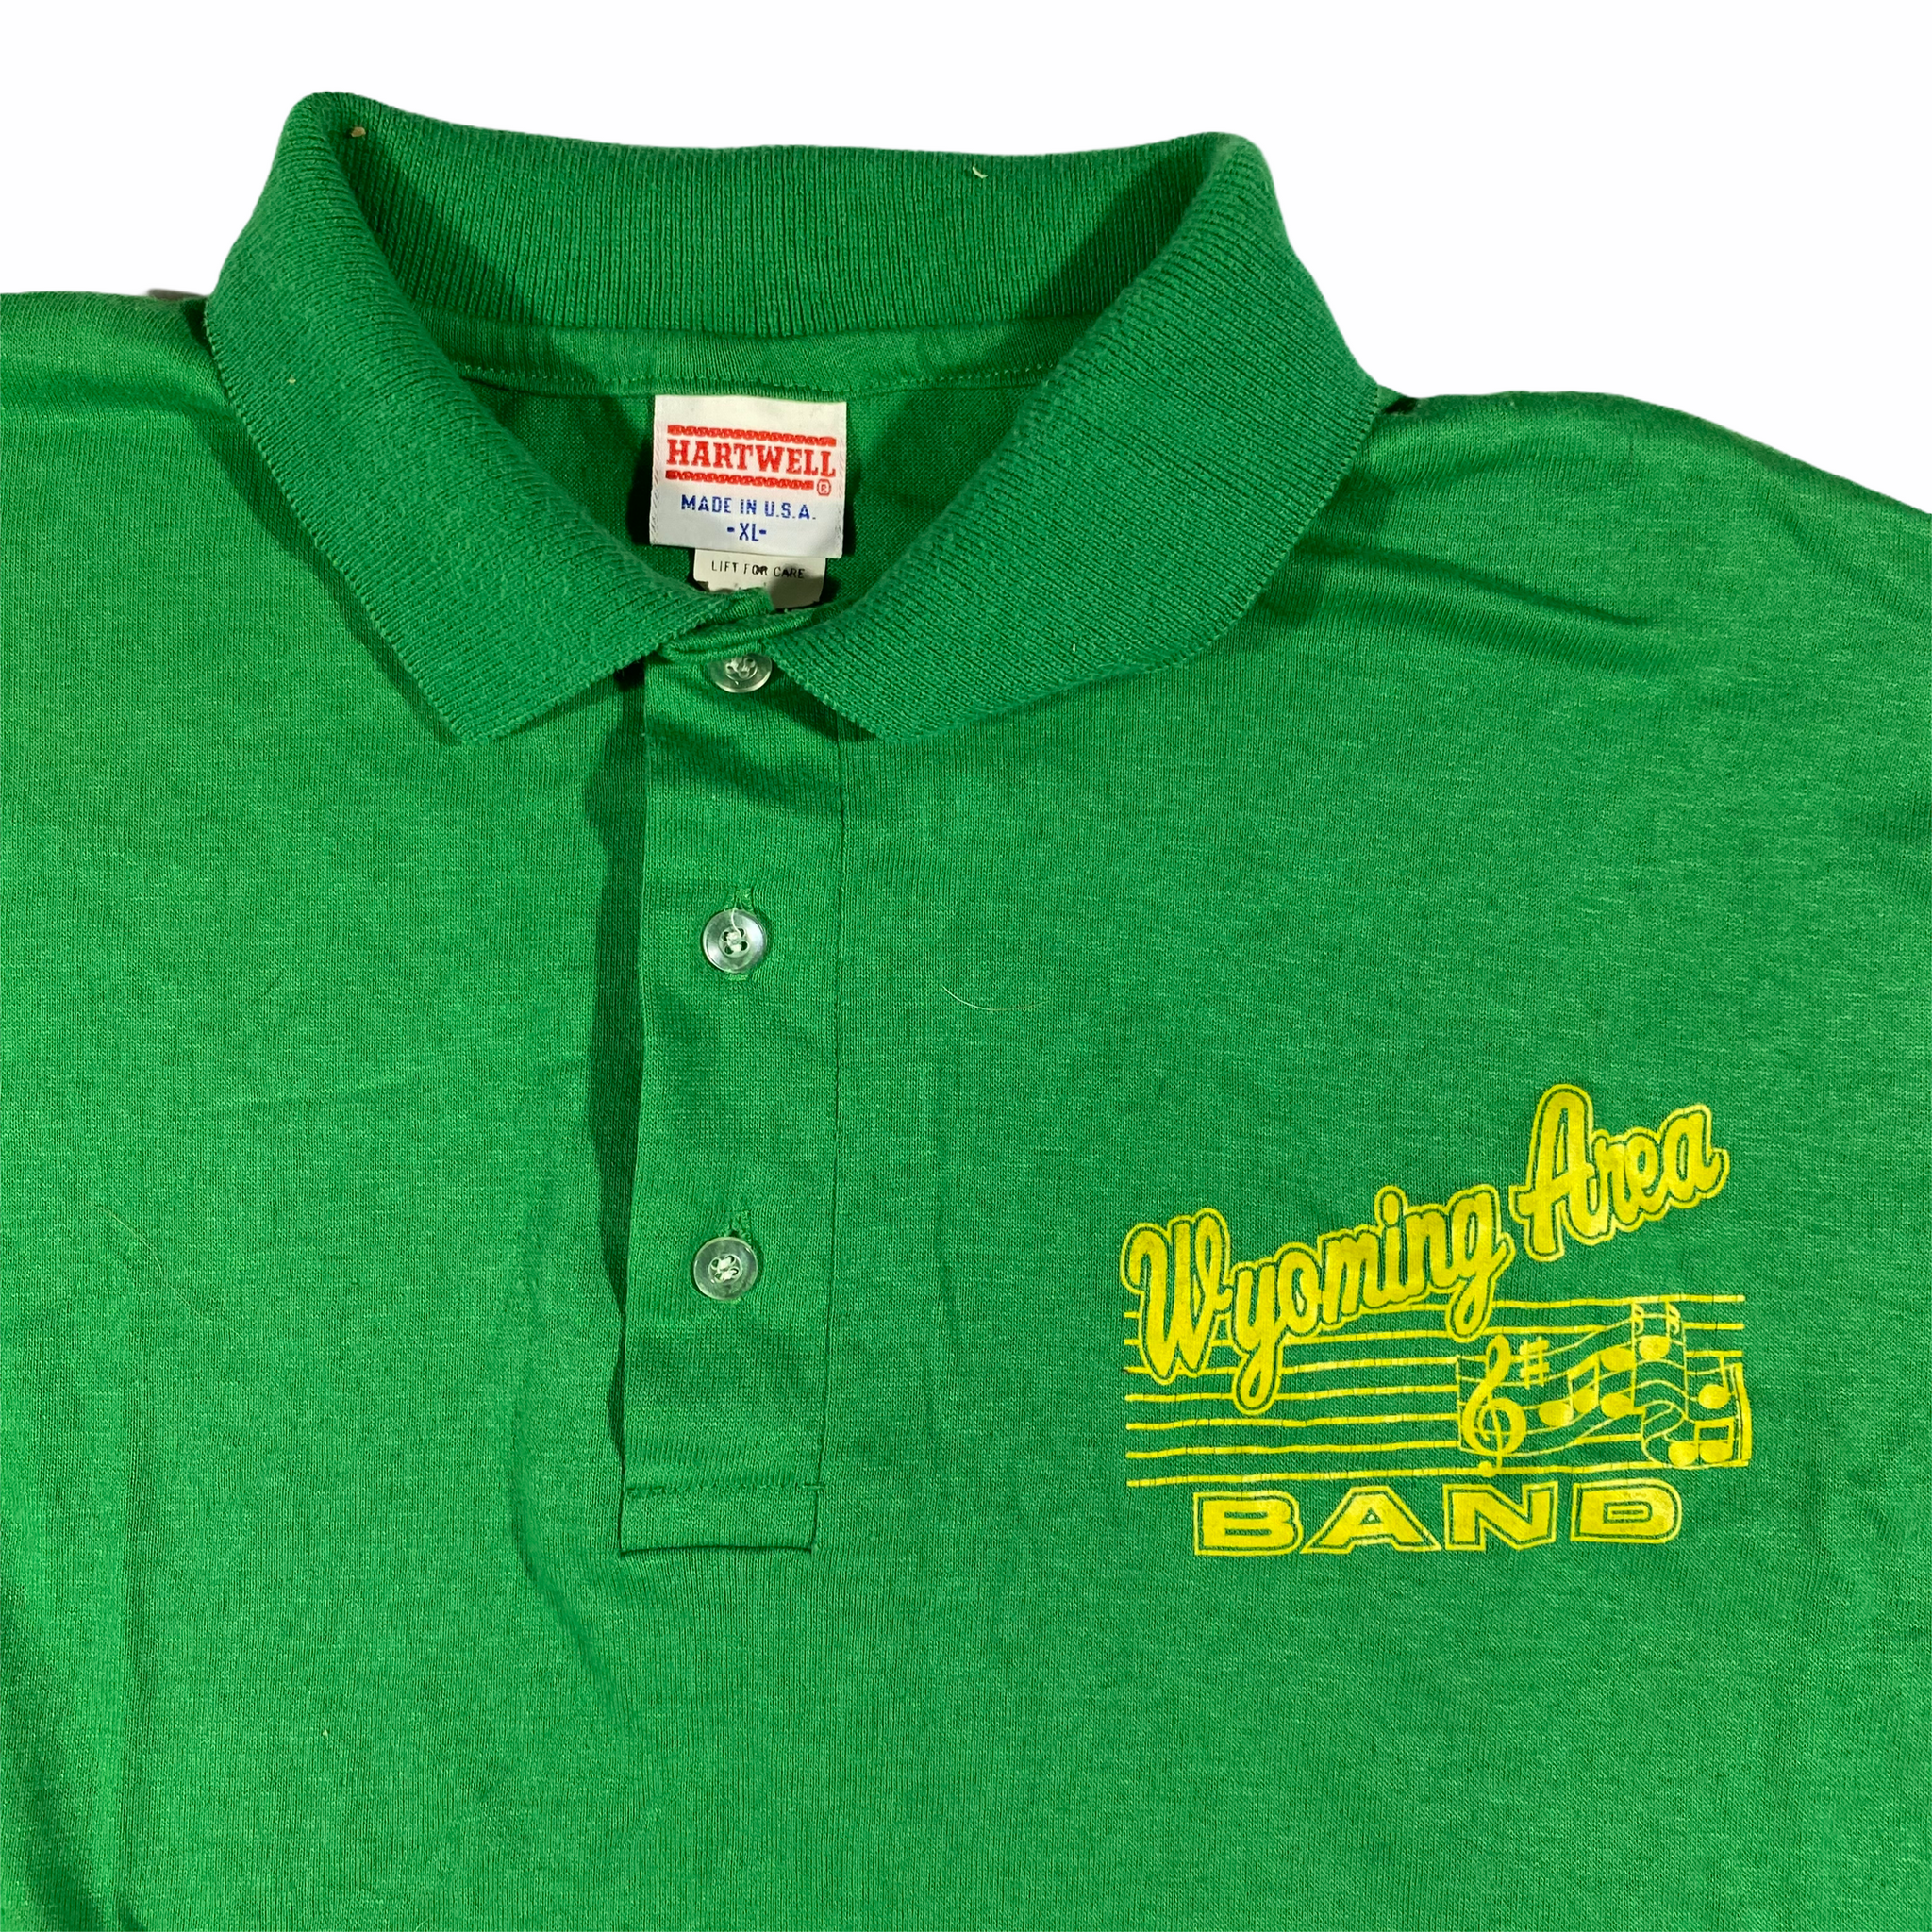 80s Wyoming PA. marching band polo shirt. XL